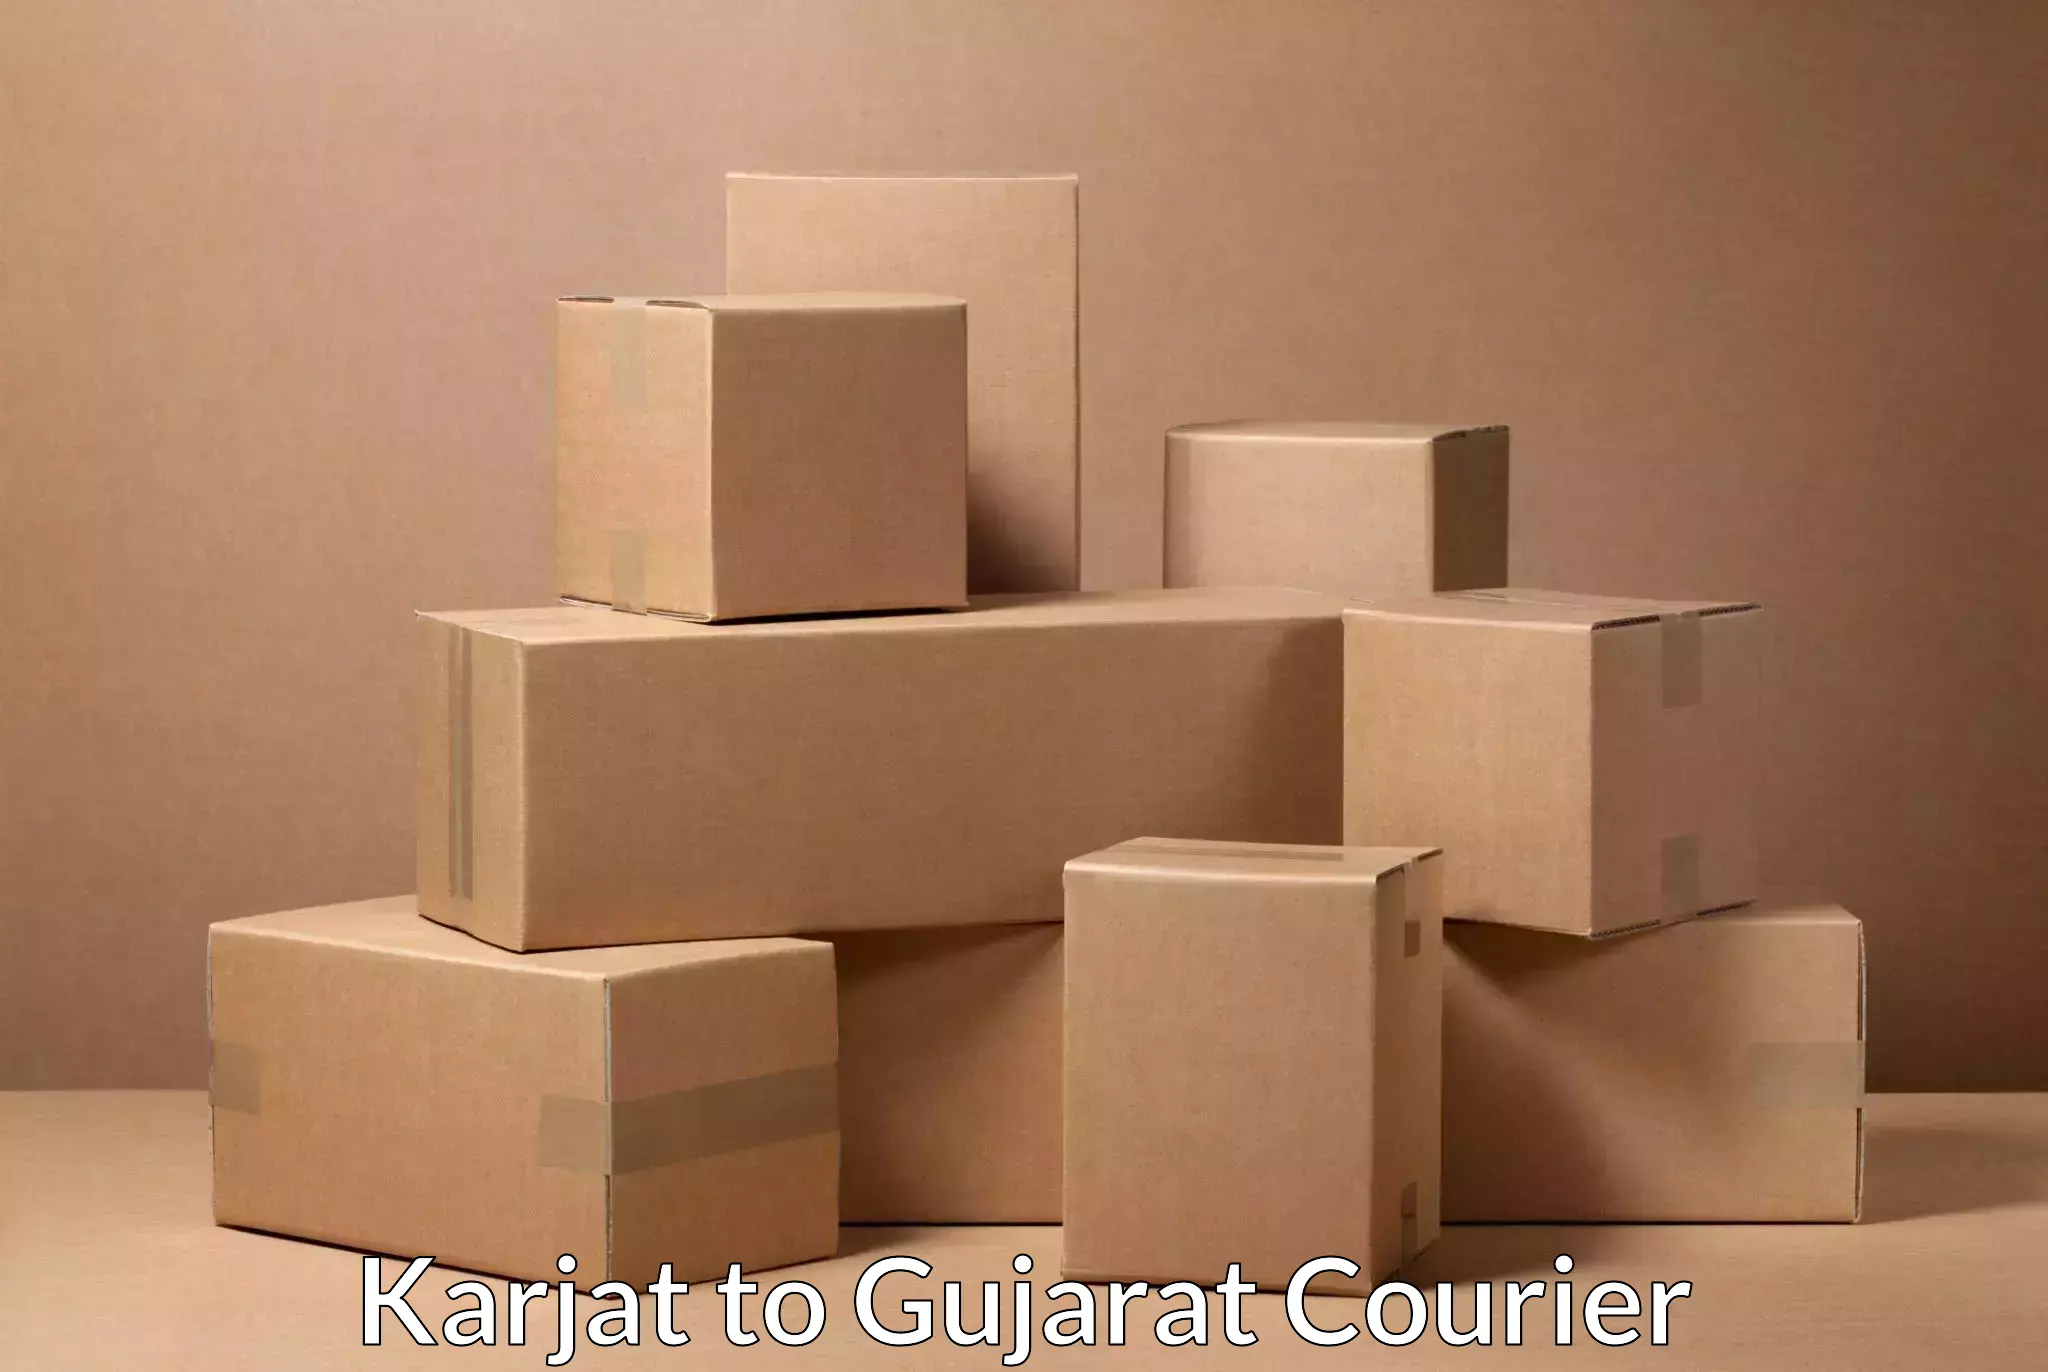 Reliable courier service in Karjat to Bilimora